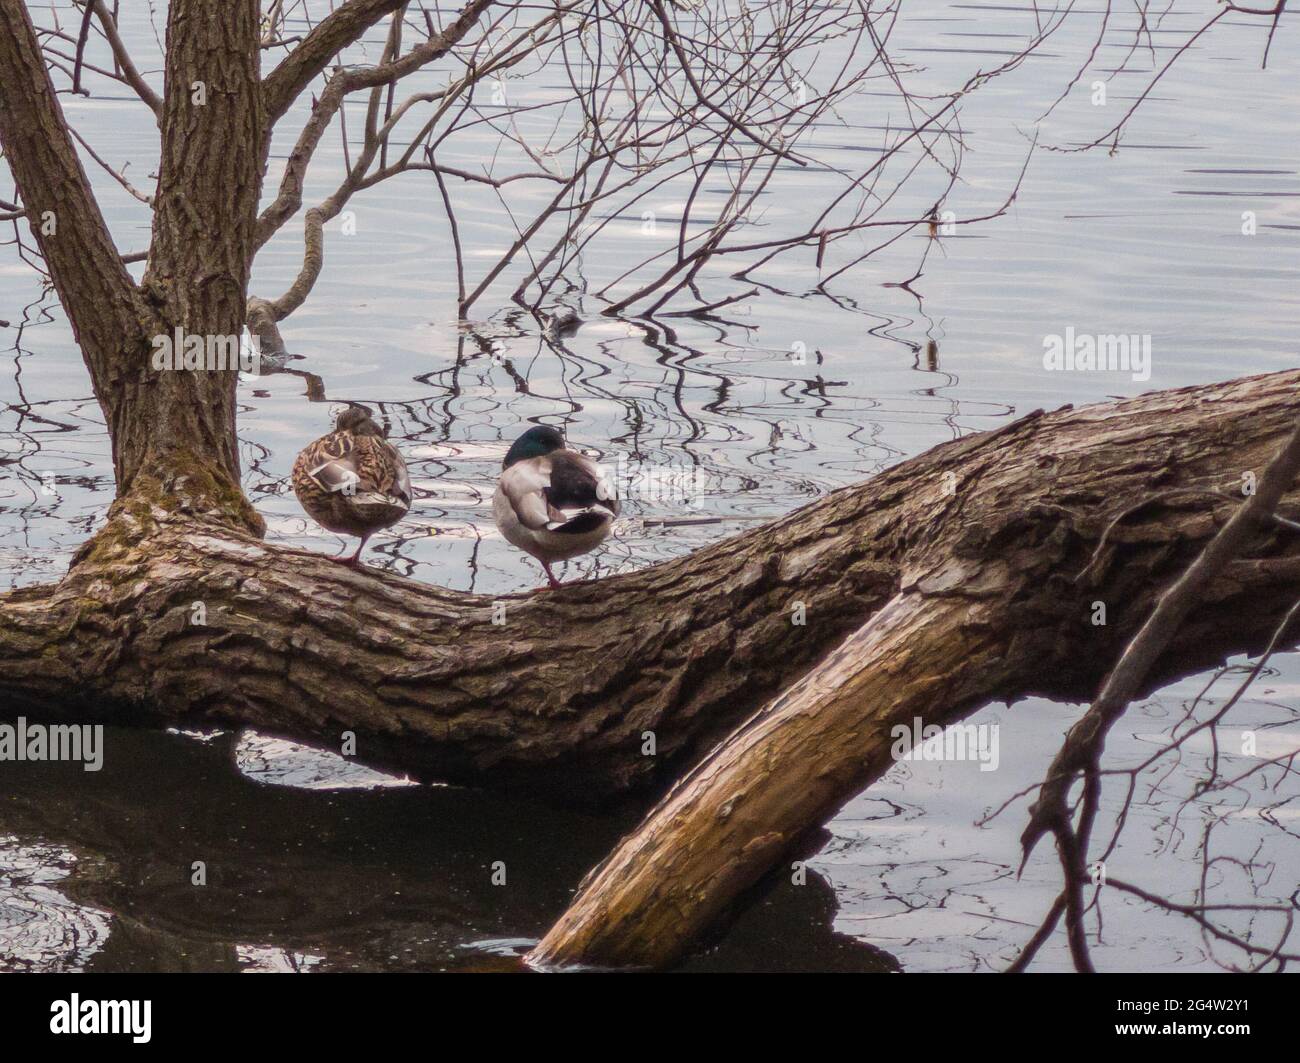 a male and a female duck standing on one leg on a tree trunk lying in water with a rippled surface Stock Photo